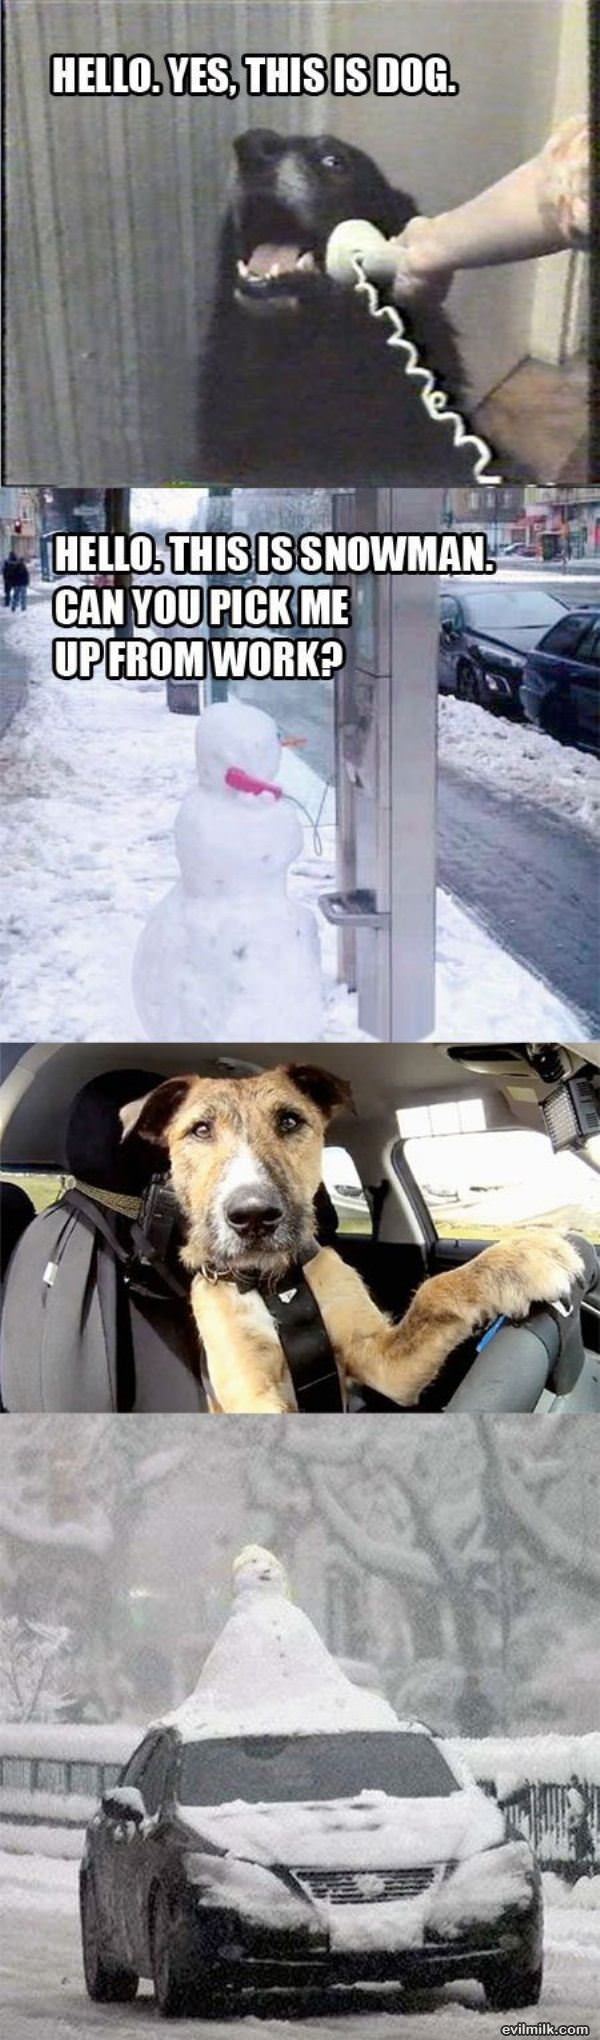 Dog And Snowman